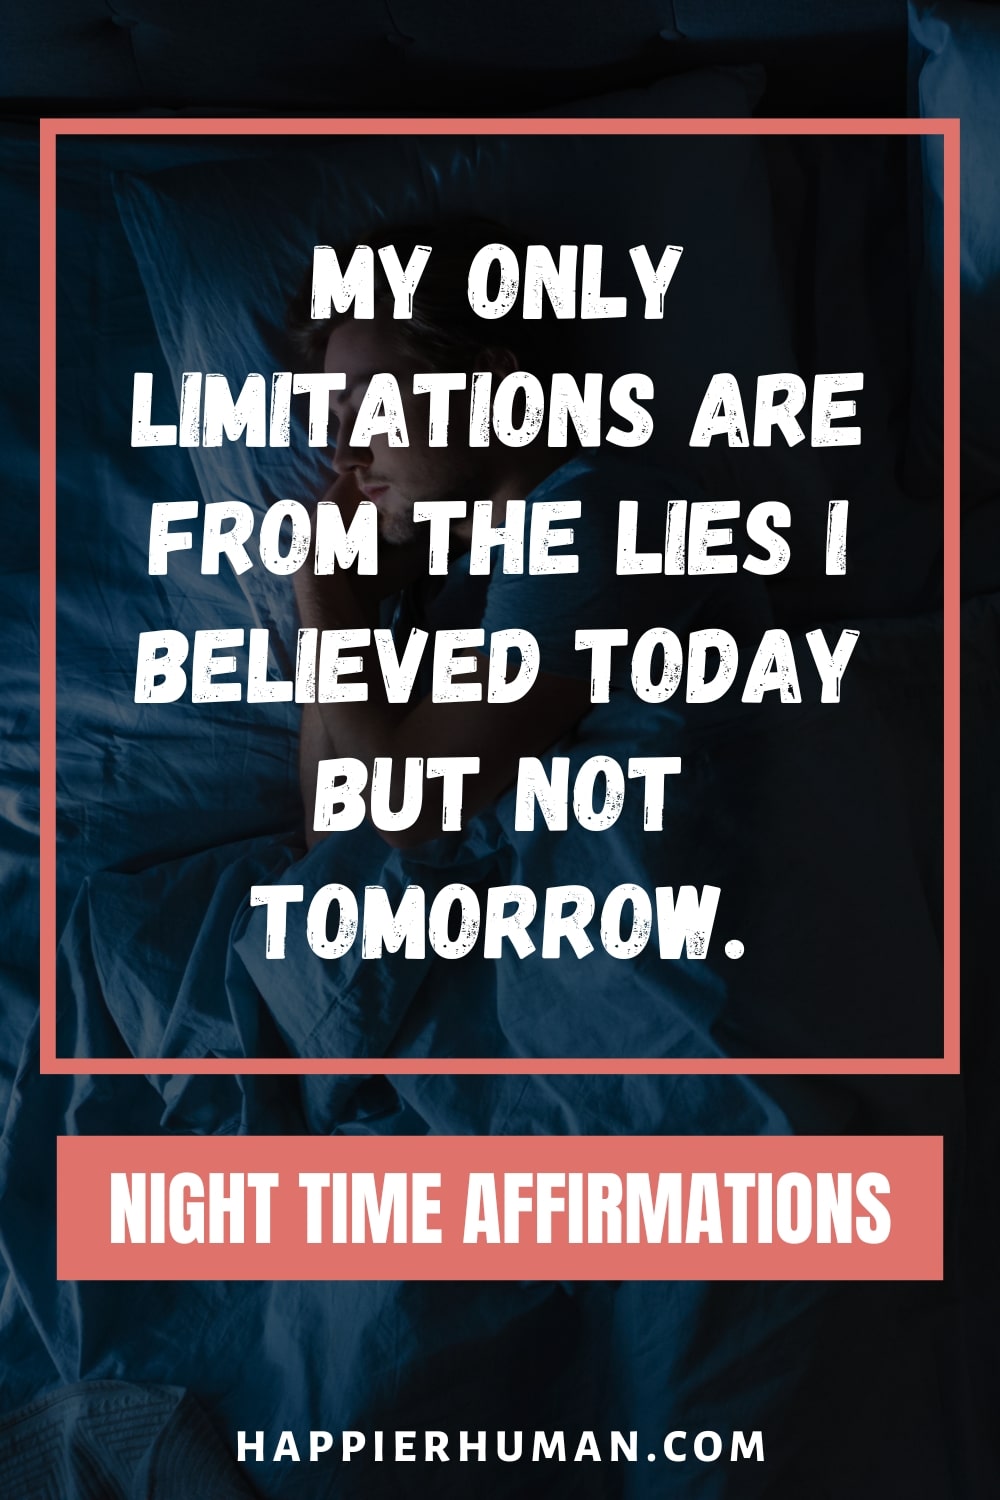 Affirmations for a good night's sleep